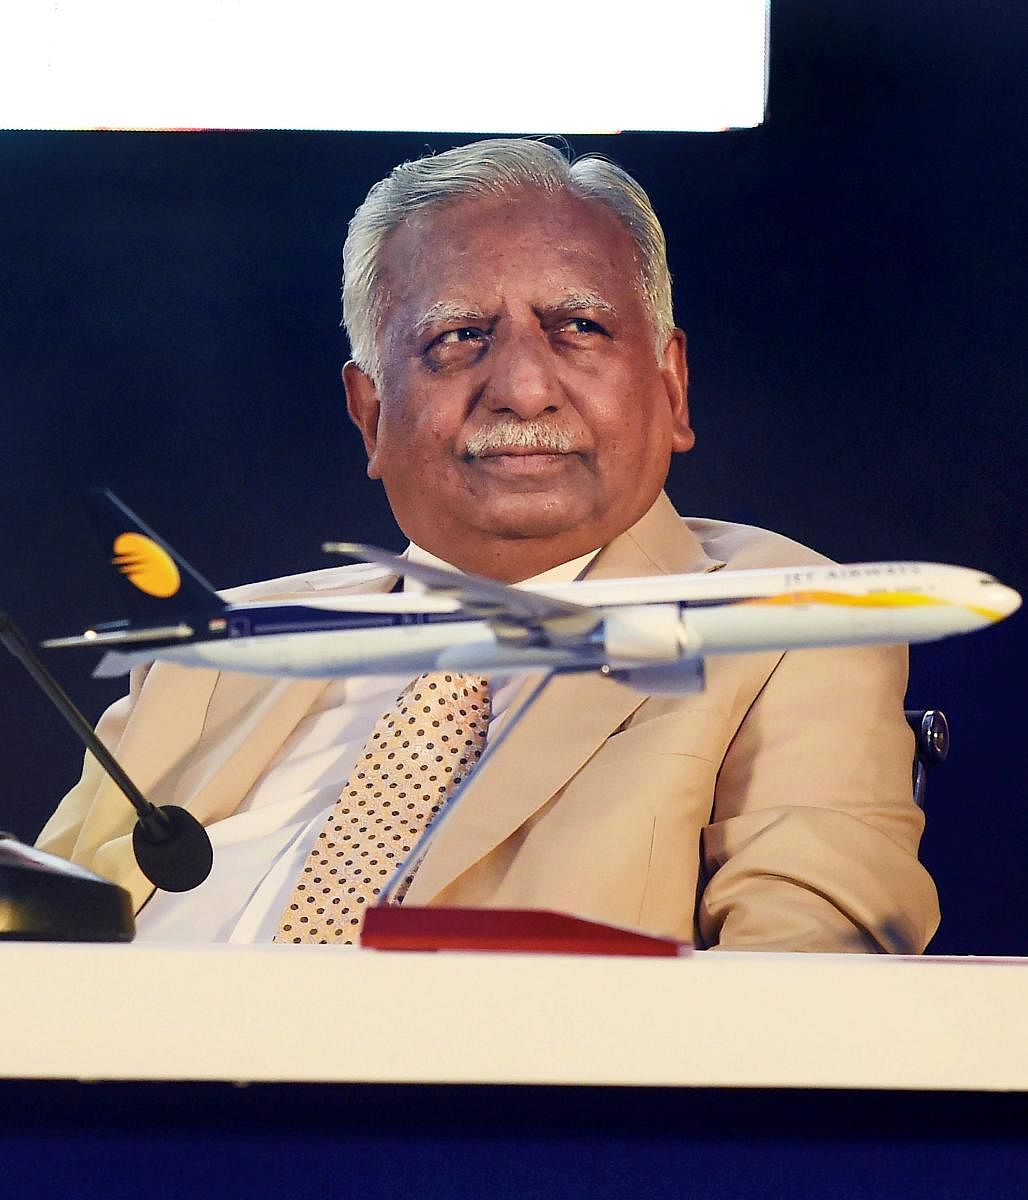 Jet Airways founder Naresh Goyal has decided not to bid for acquiring stake in the cash-strapped airline, sources said on Tuesday. PTI file photo